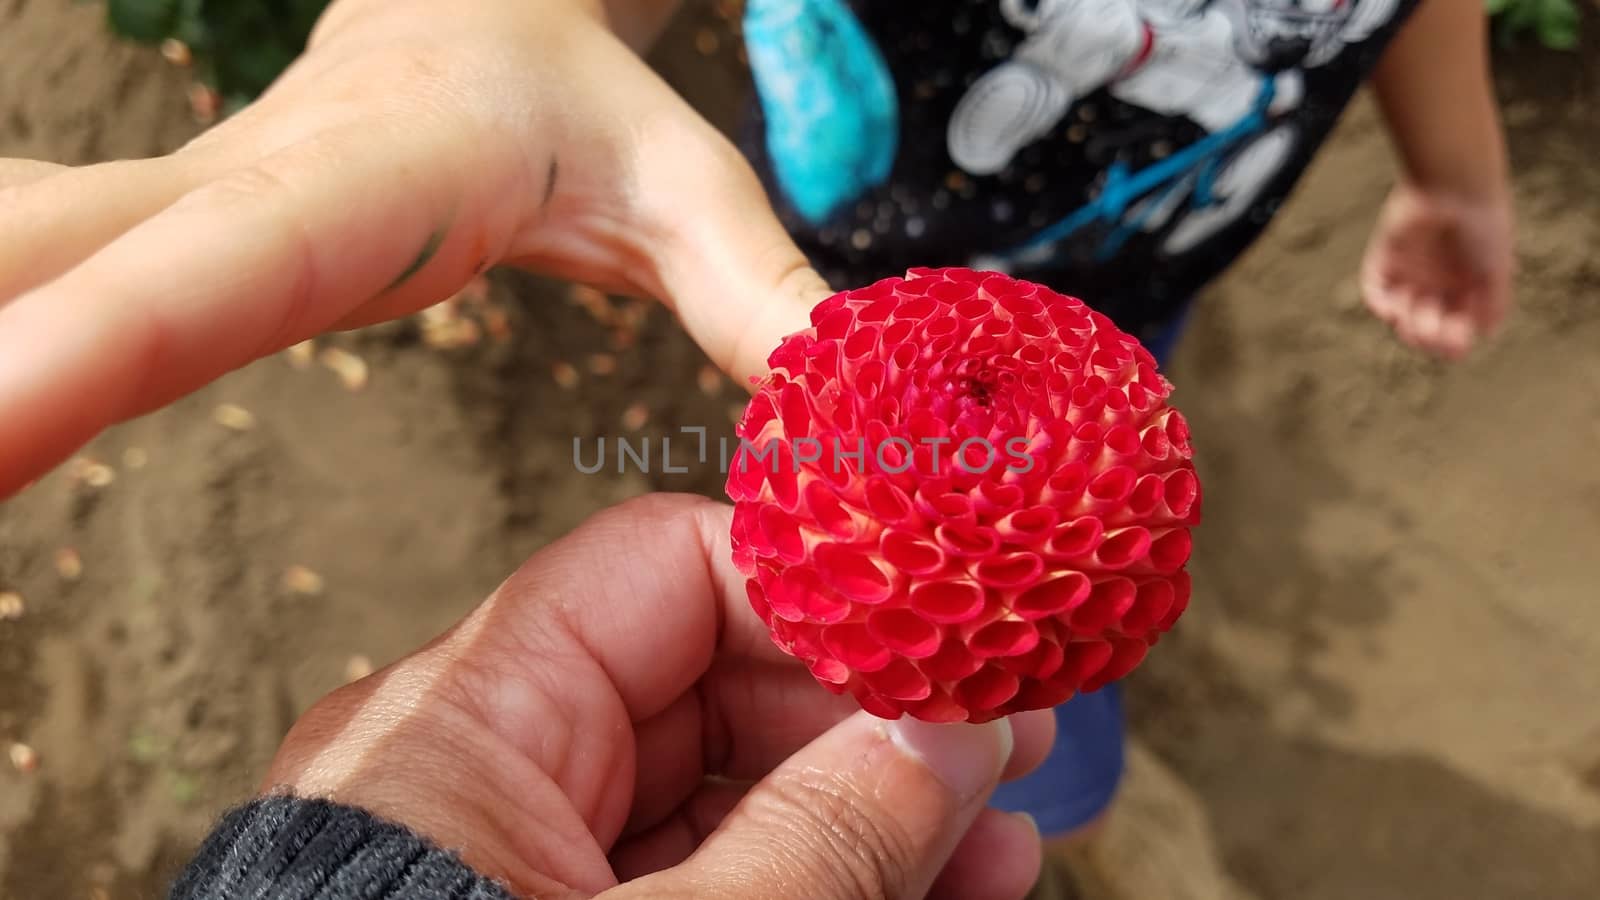 mother handing pretty red dahlia flower to son's hand